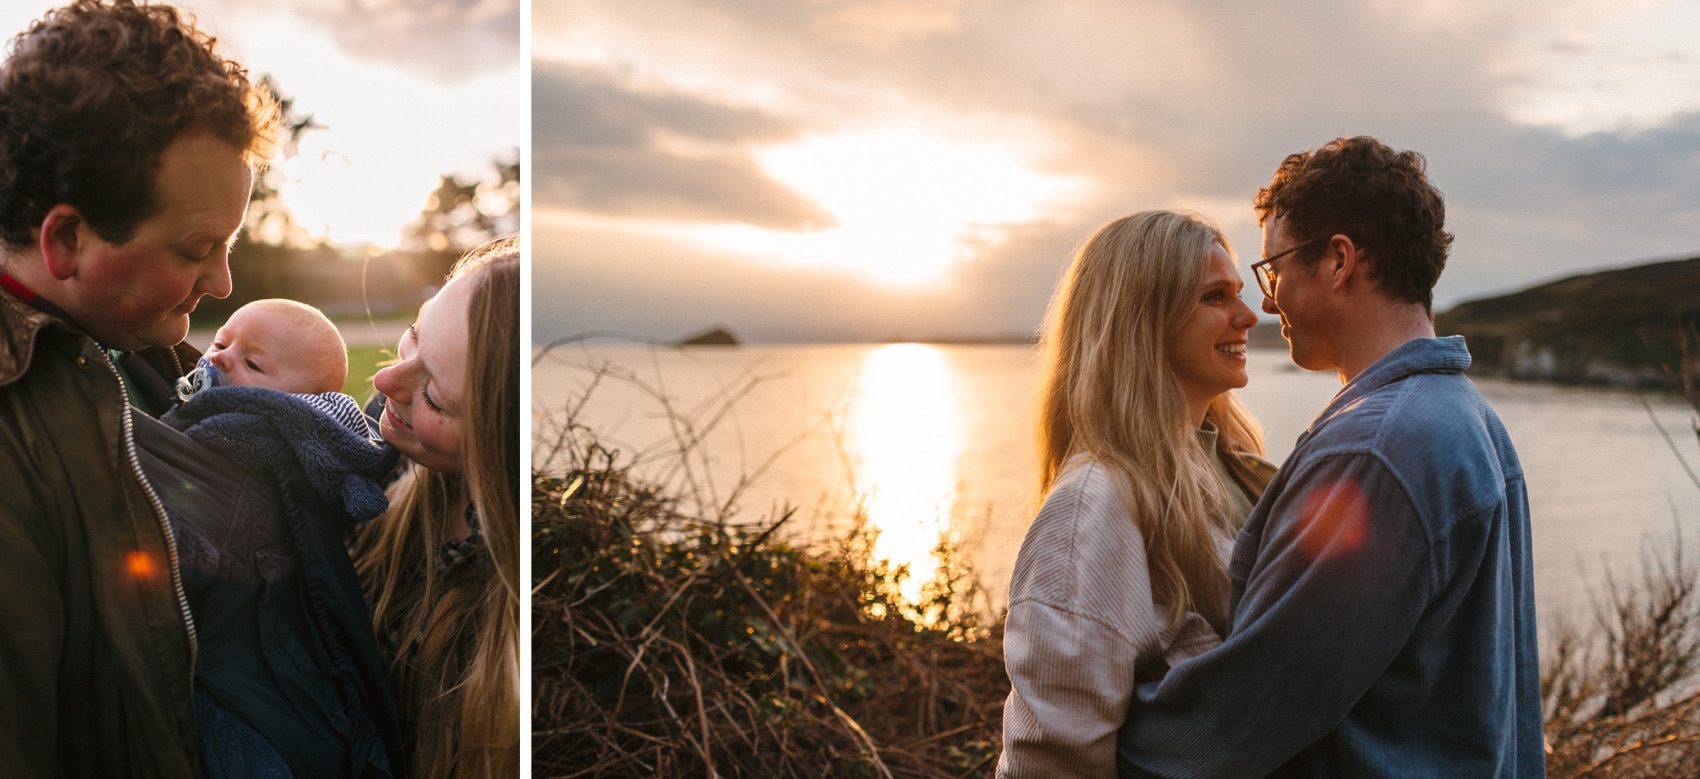 Sunset relaxed engagement shoots in Devon by wedding photographer Freckle Photography